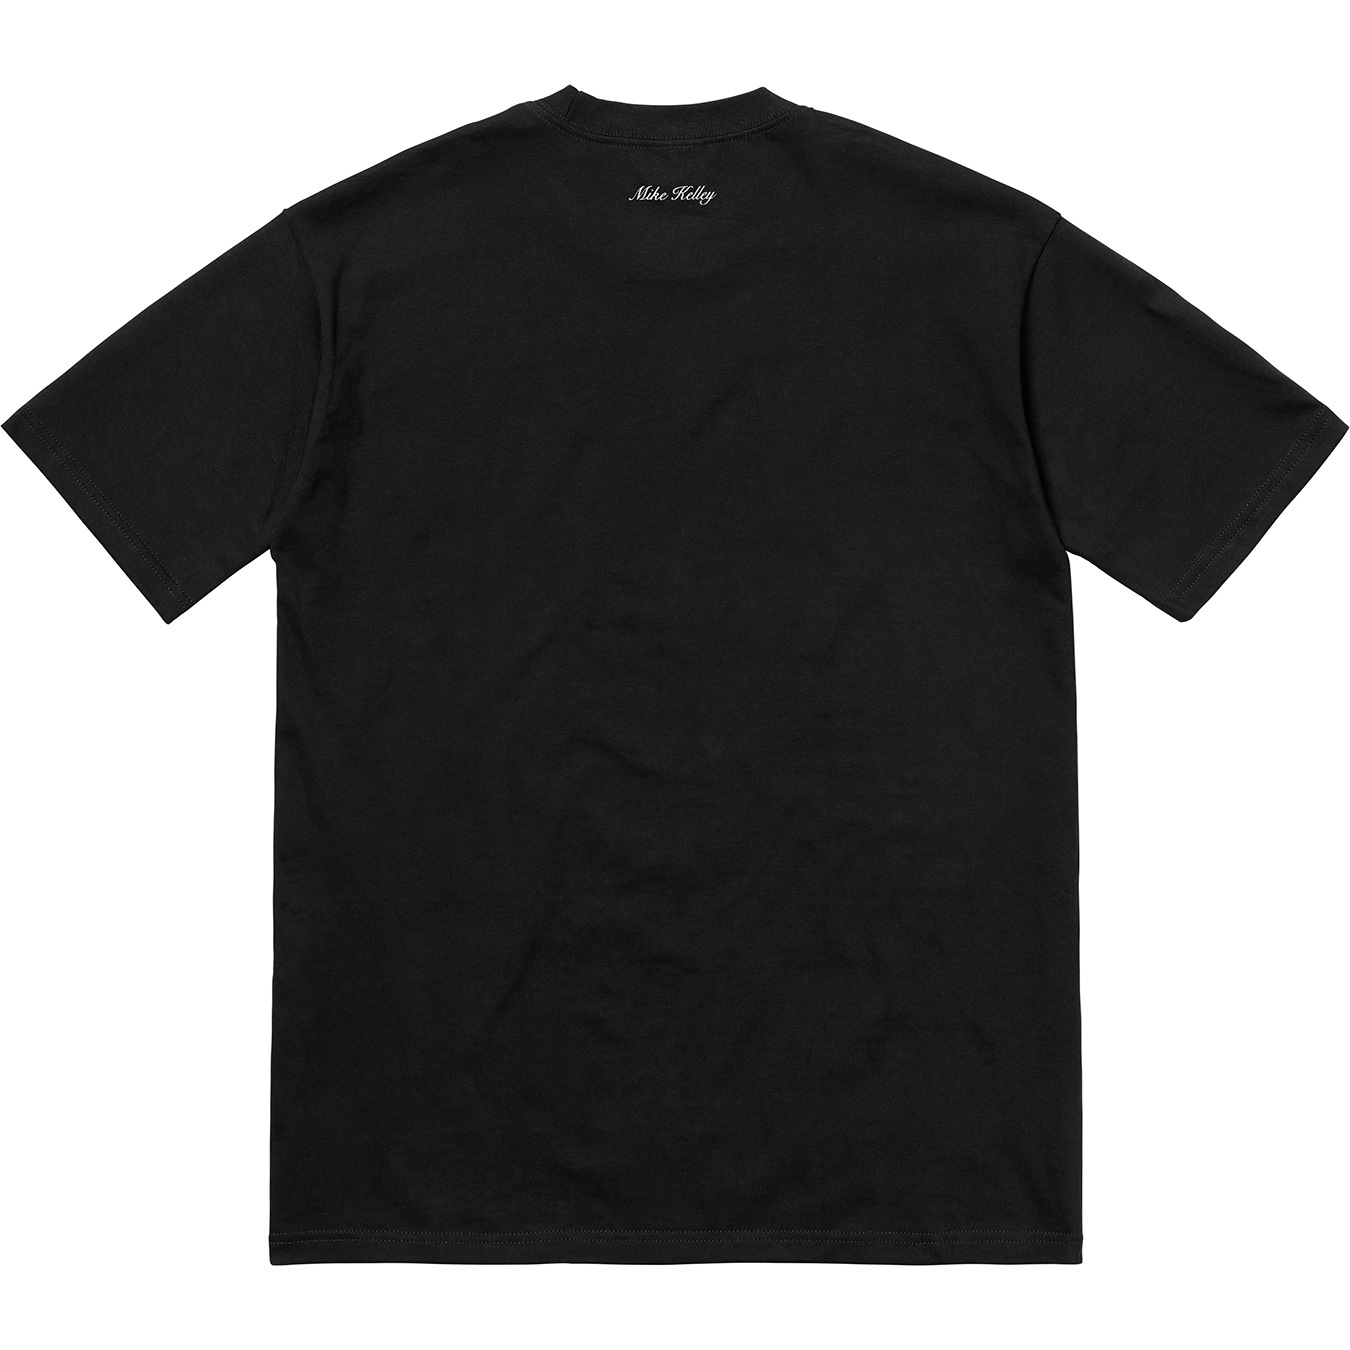 Supreme Mike Kelley The Empire State Building Tee Black メンズ ...